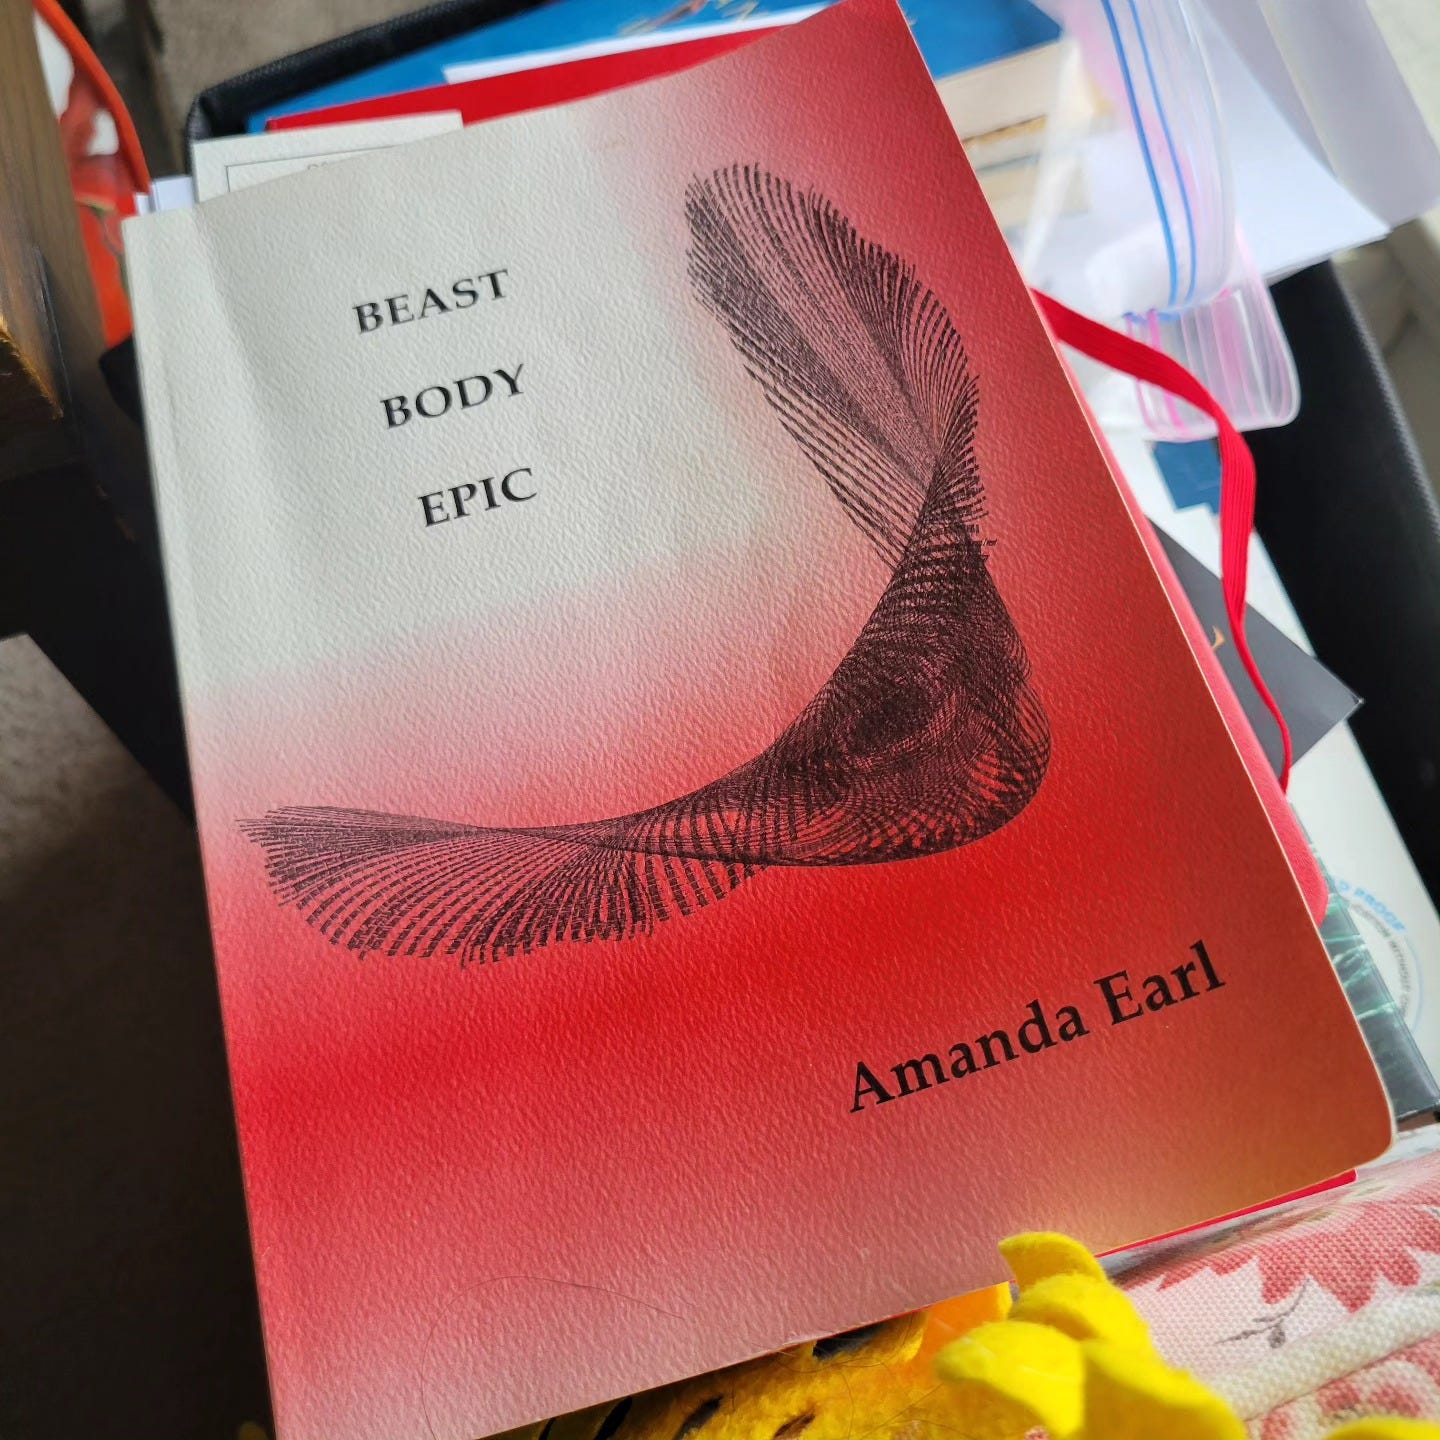 Beast Body Epic/Amanda Earl & a visual poem in black on a red and white book, a pile of books beneath